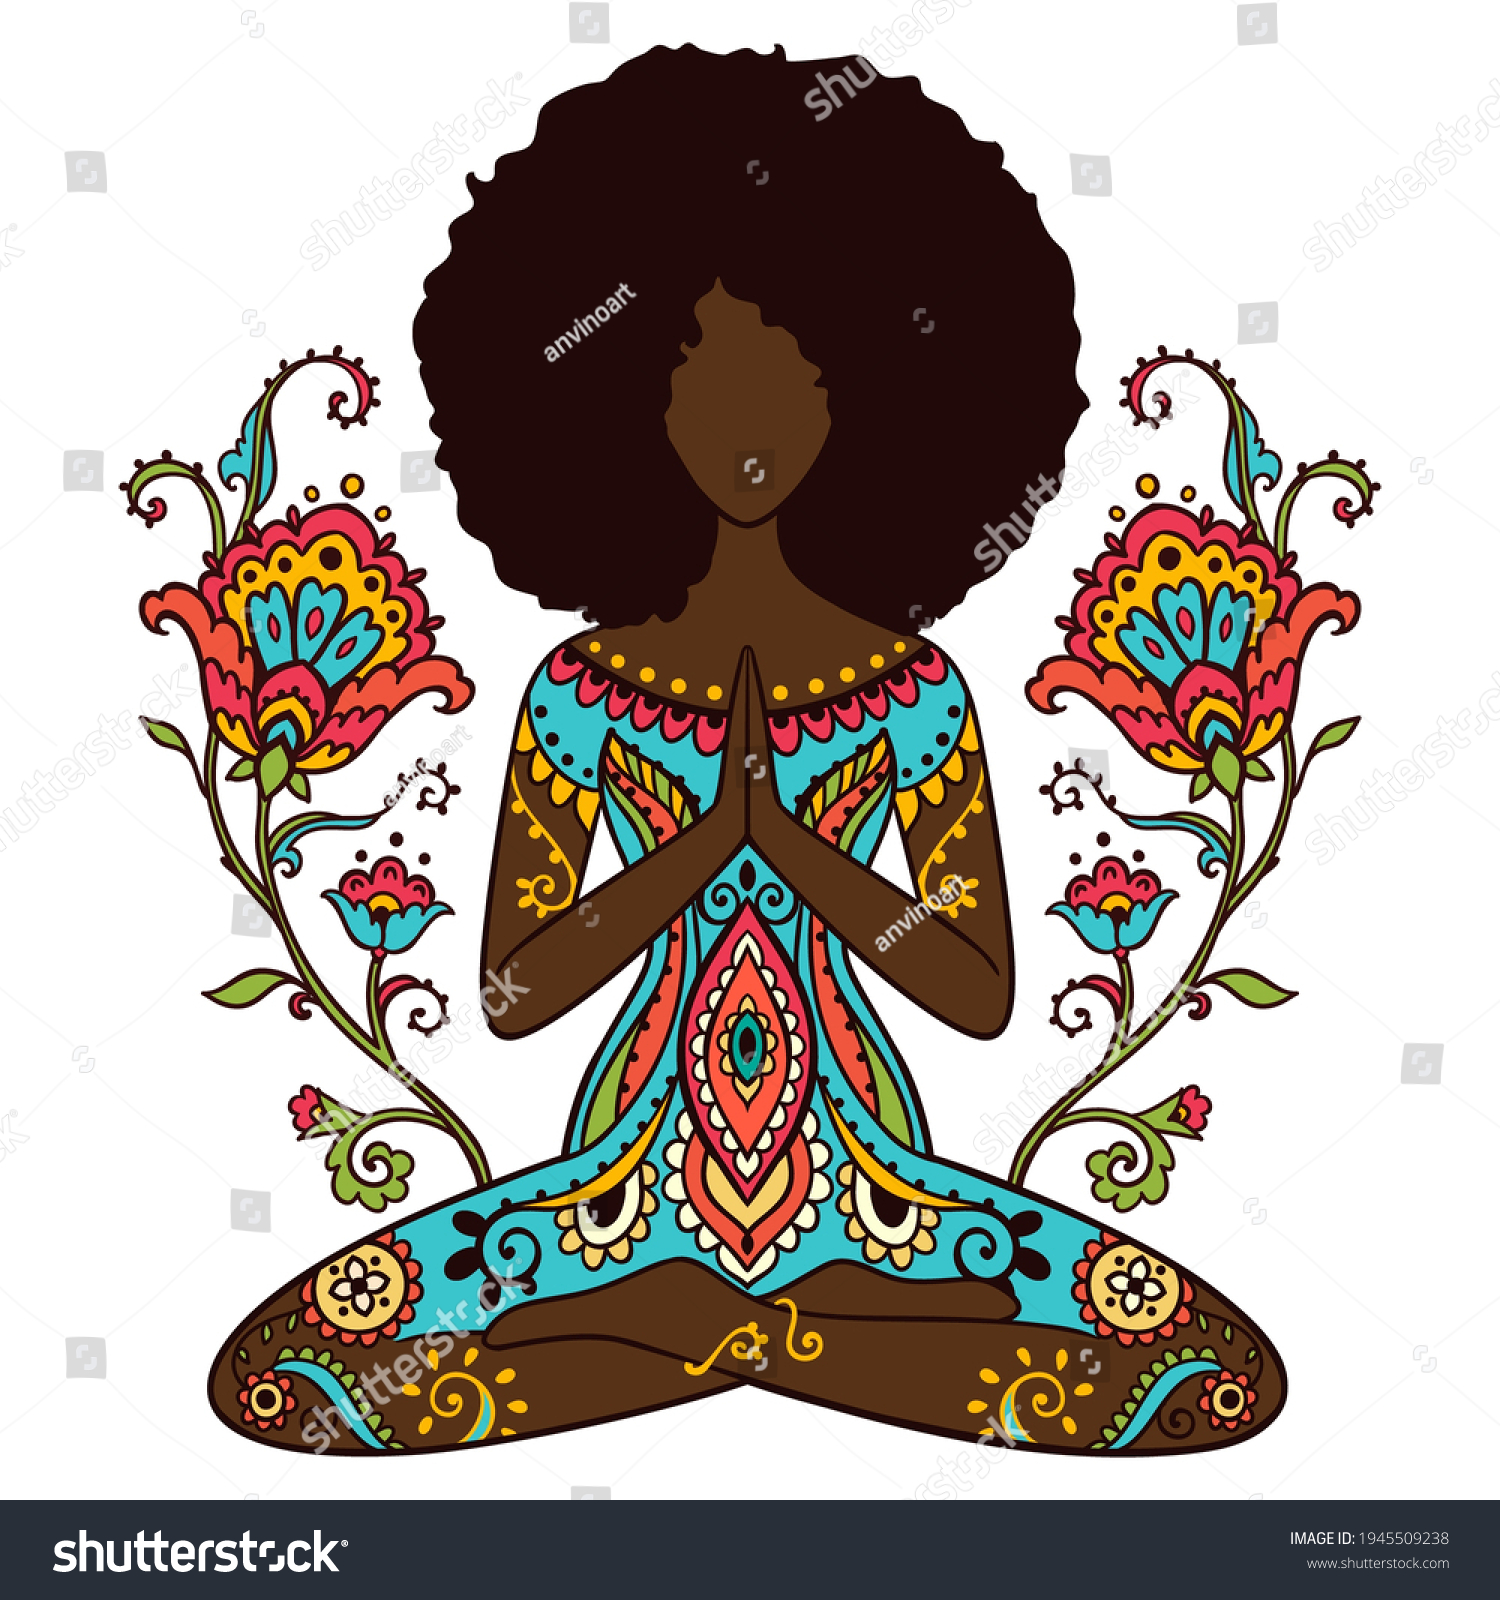 SVG of Yoga girl. African american woman doing yoga. Ornament Meditation pose. India ethnic vector illustration style. Black woman lotus Yoga pose with flowers
 svg